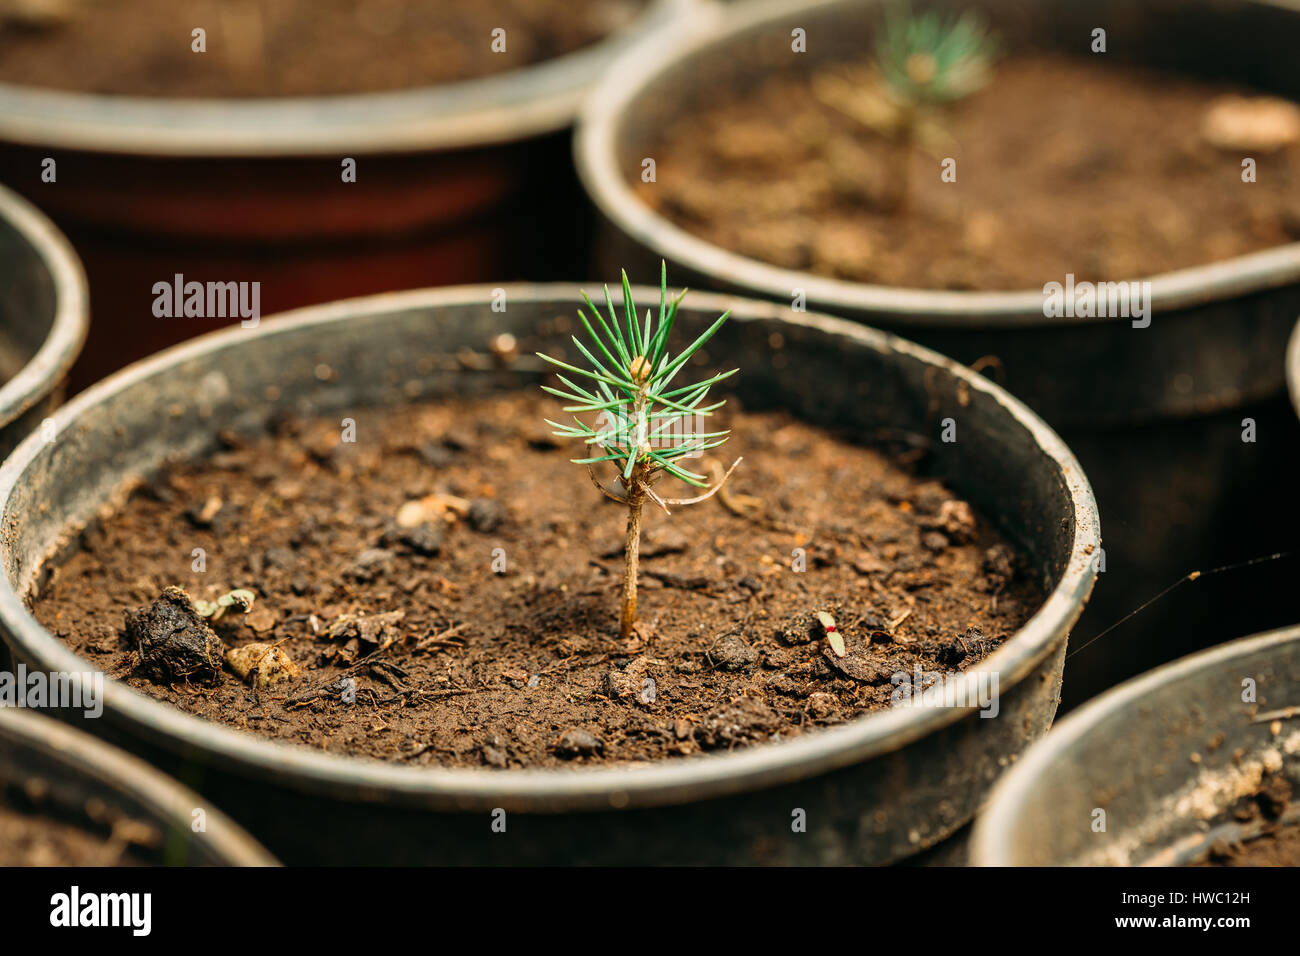 Small Green Sprouts Of Cedar Tree Plant With Leaf, Leaves Growing From Soil In Pot In Greenhouse Or Hothouse. Spring, Concept Of New Life. Stock Photo